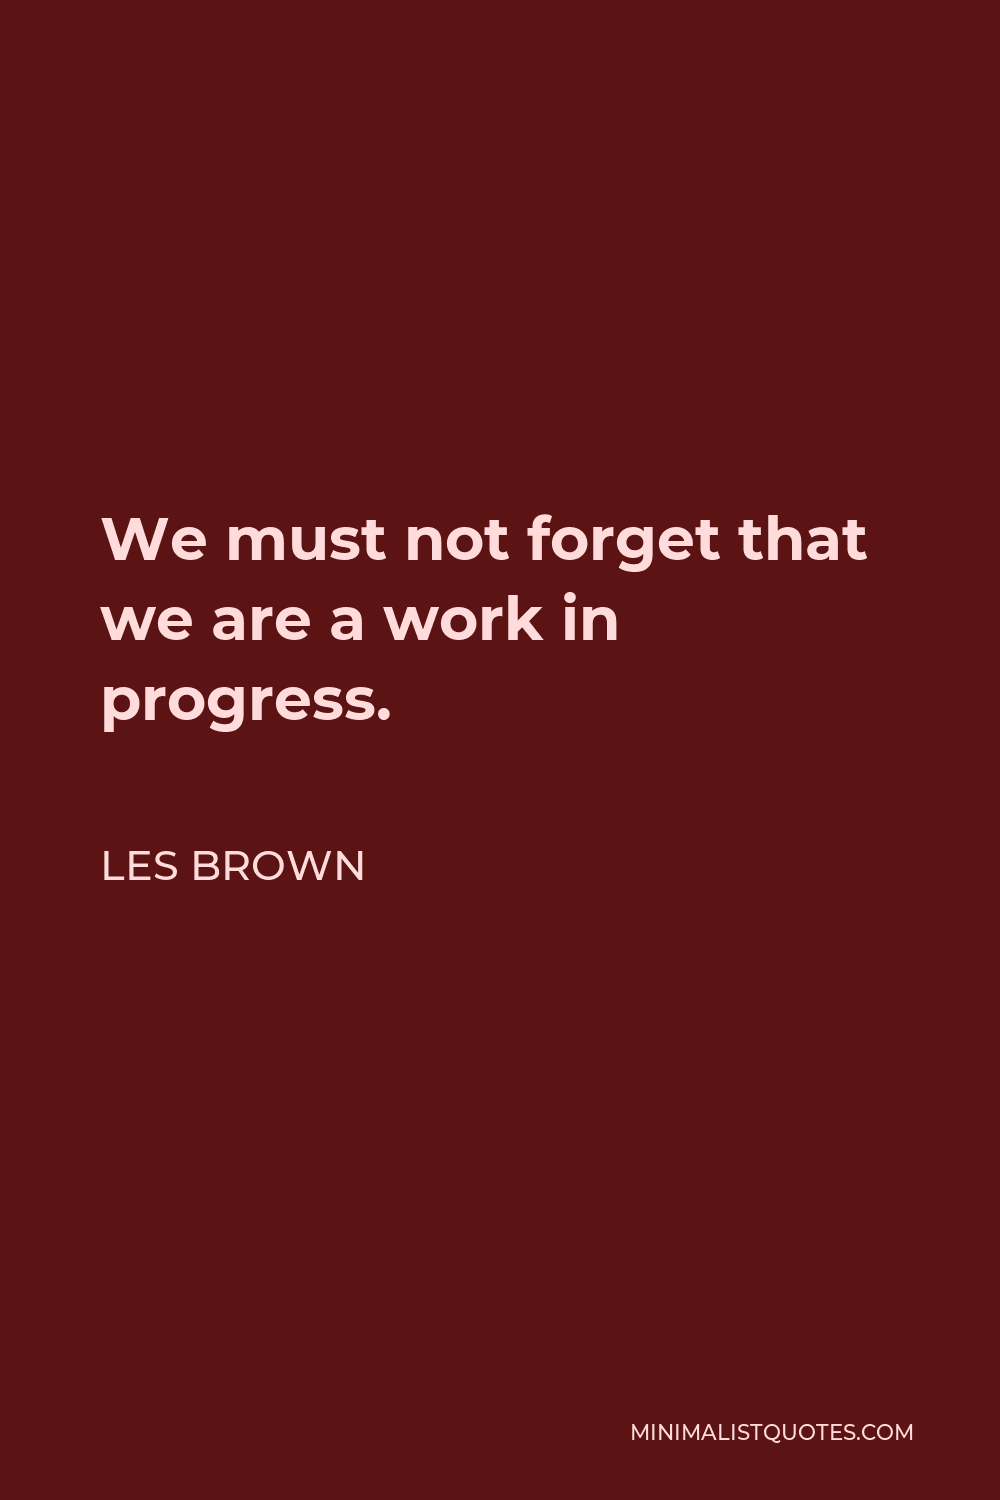 Les Brown Quote - We must not forget that we are a work in progress.